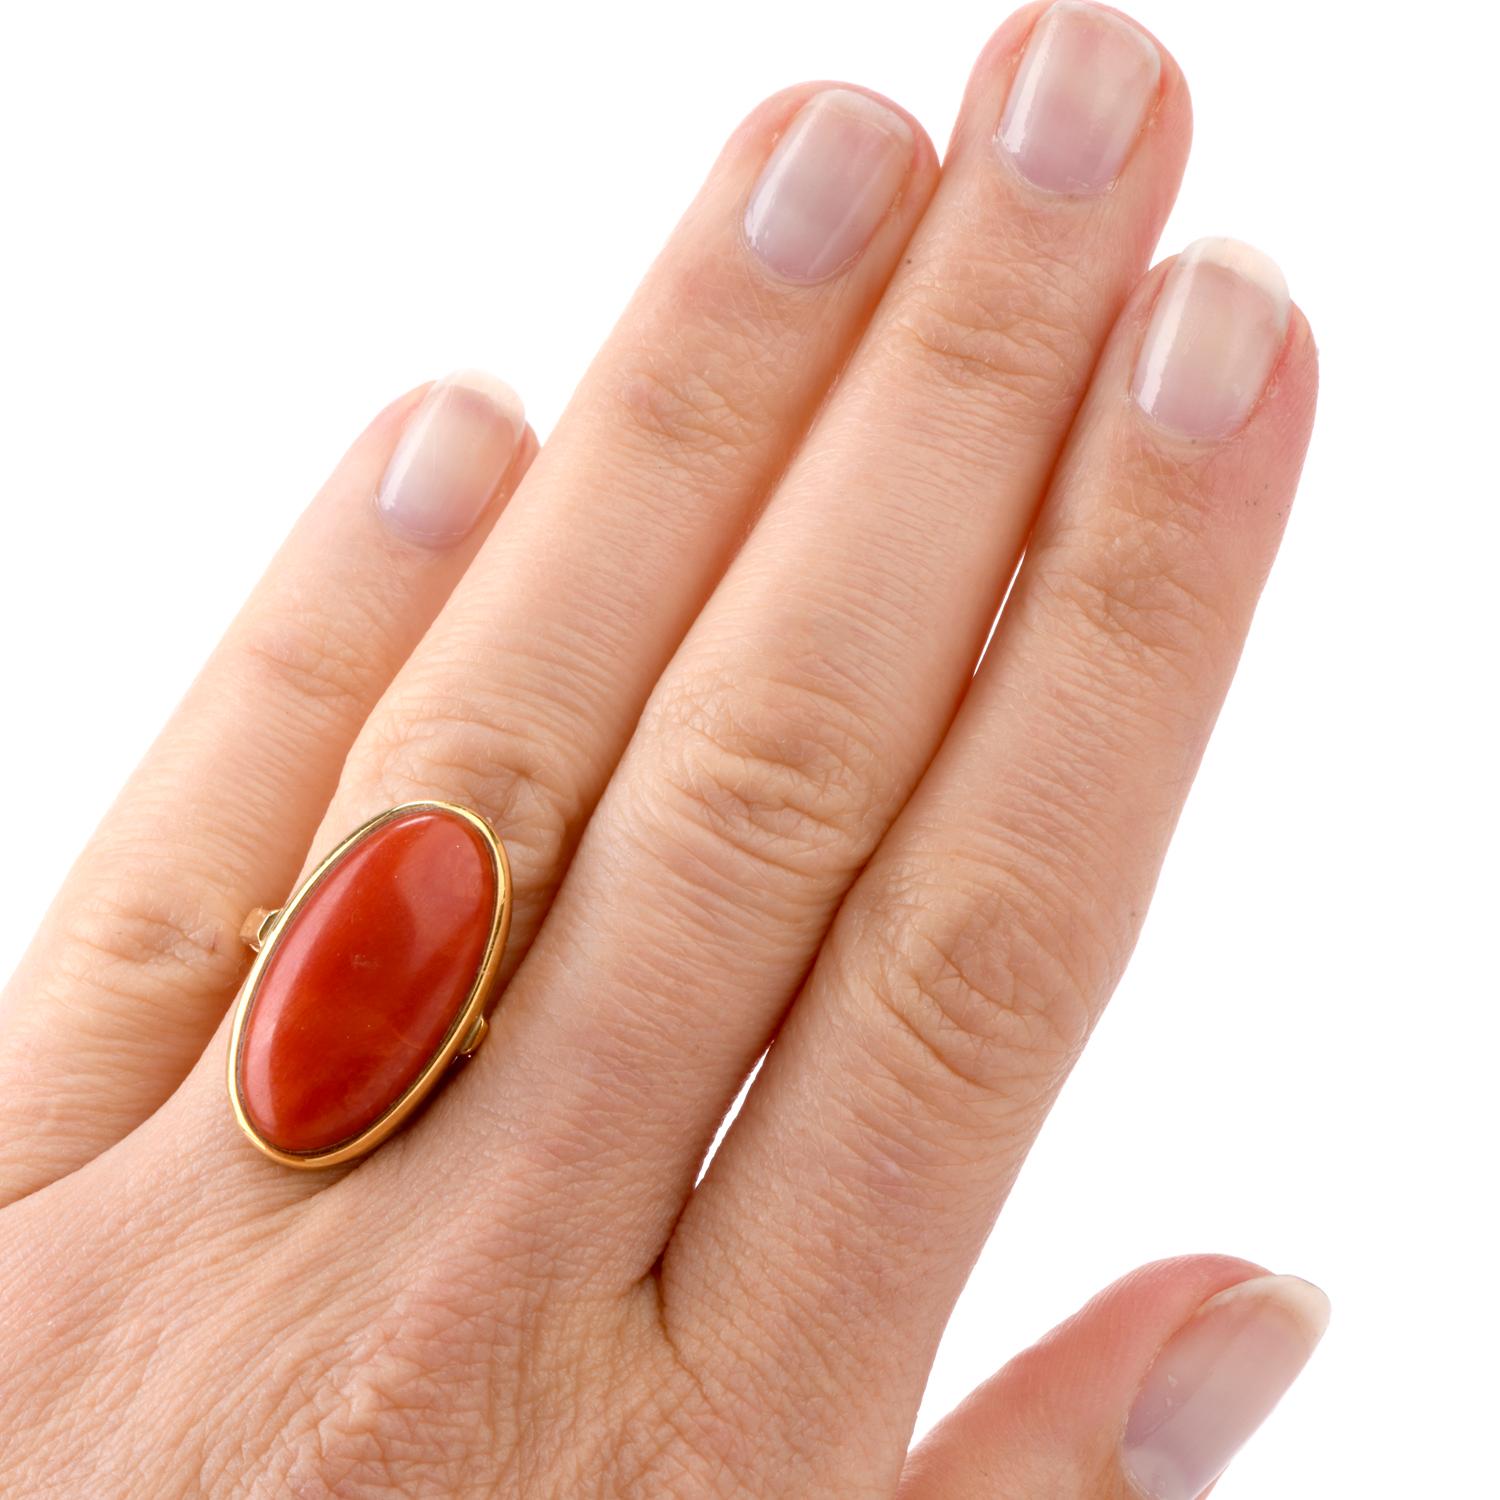 Simple is Elegant! This vintage cocktail ring features one very large elongated oval shaped Natural Red Coral  measuring appx. 23.63 x 11.72mm

and was crafted in 18K yellow gold. Stamped 750, this ring remains in Very Good Condition.

Currently a